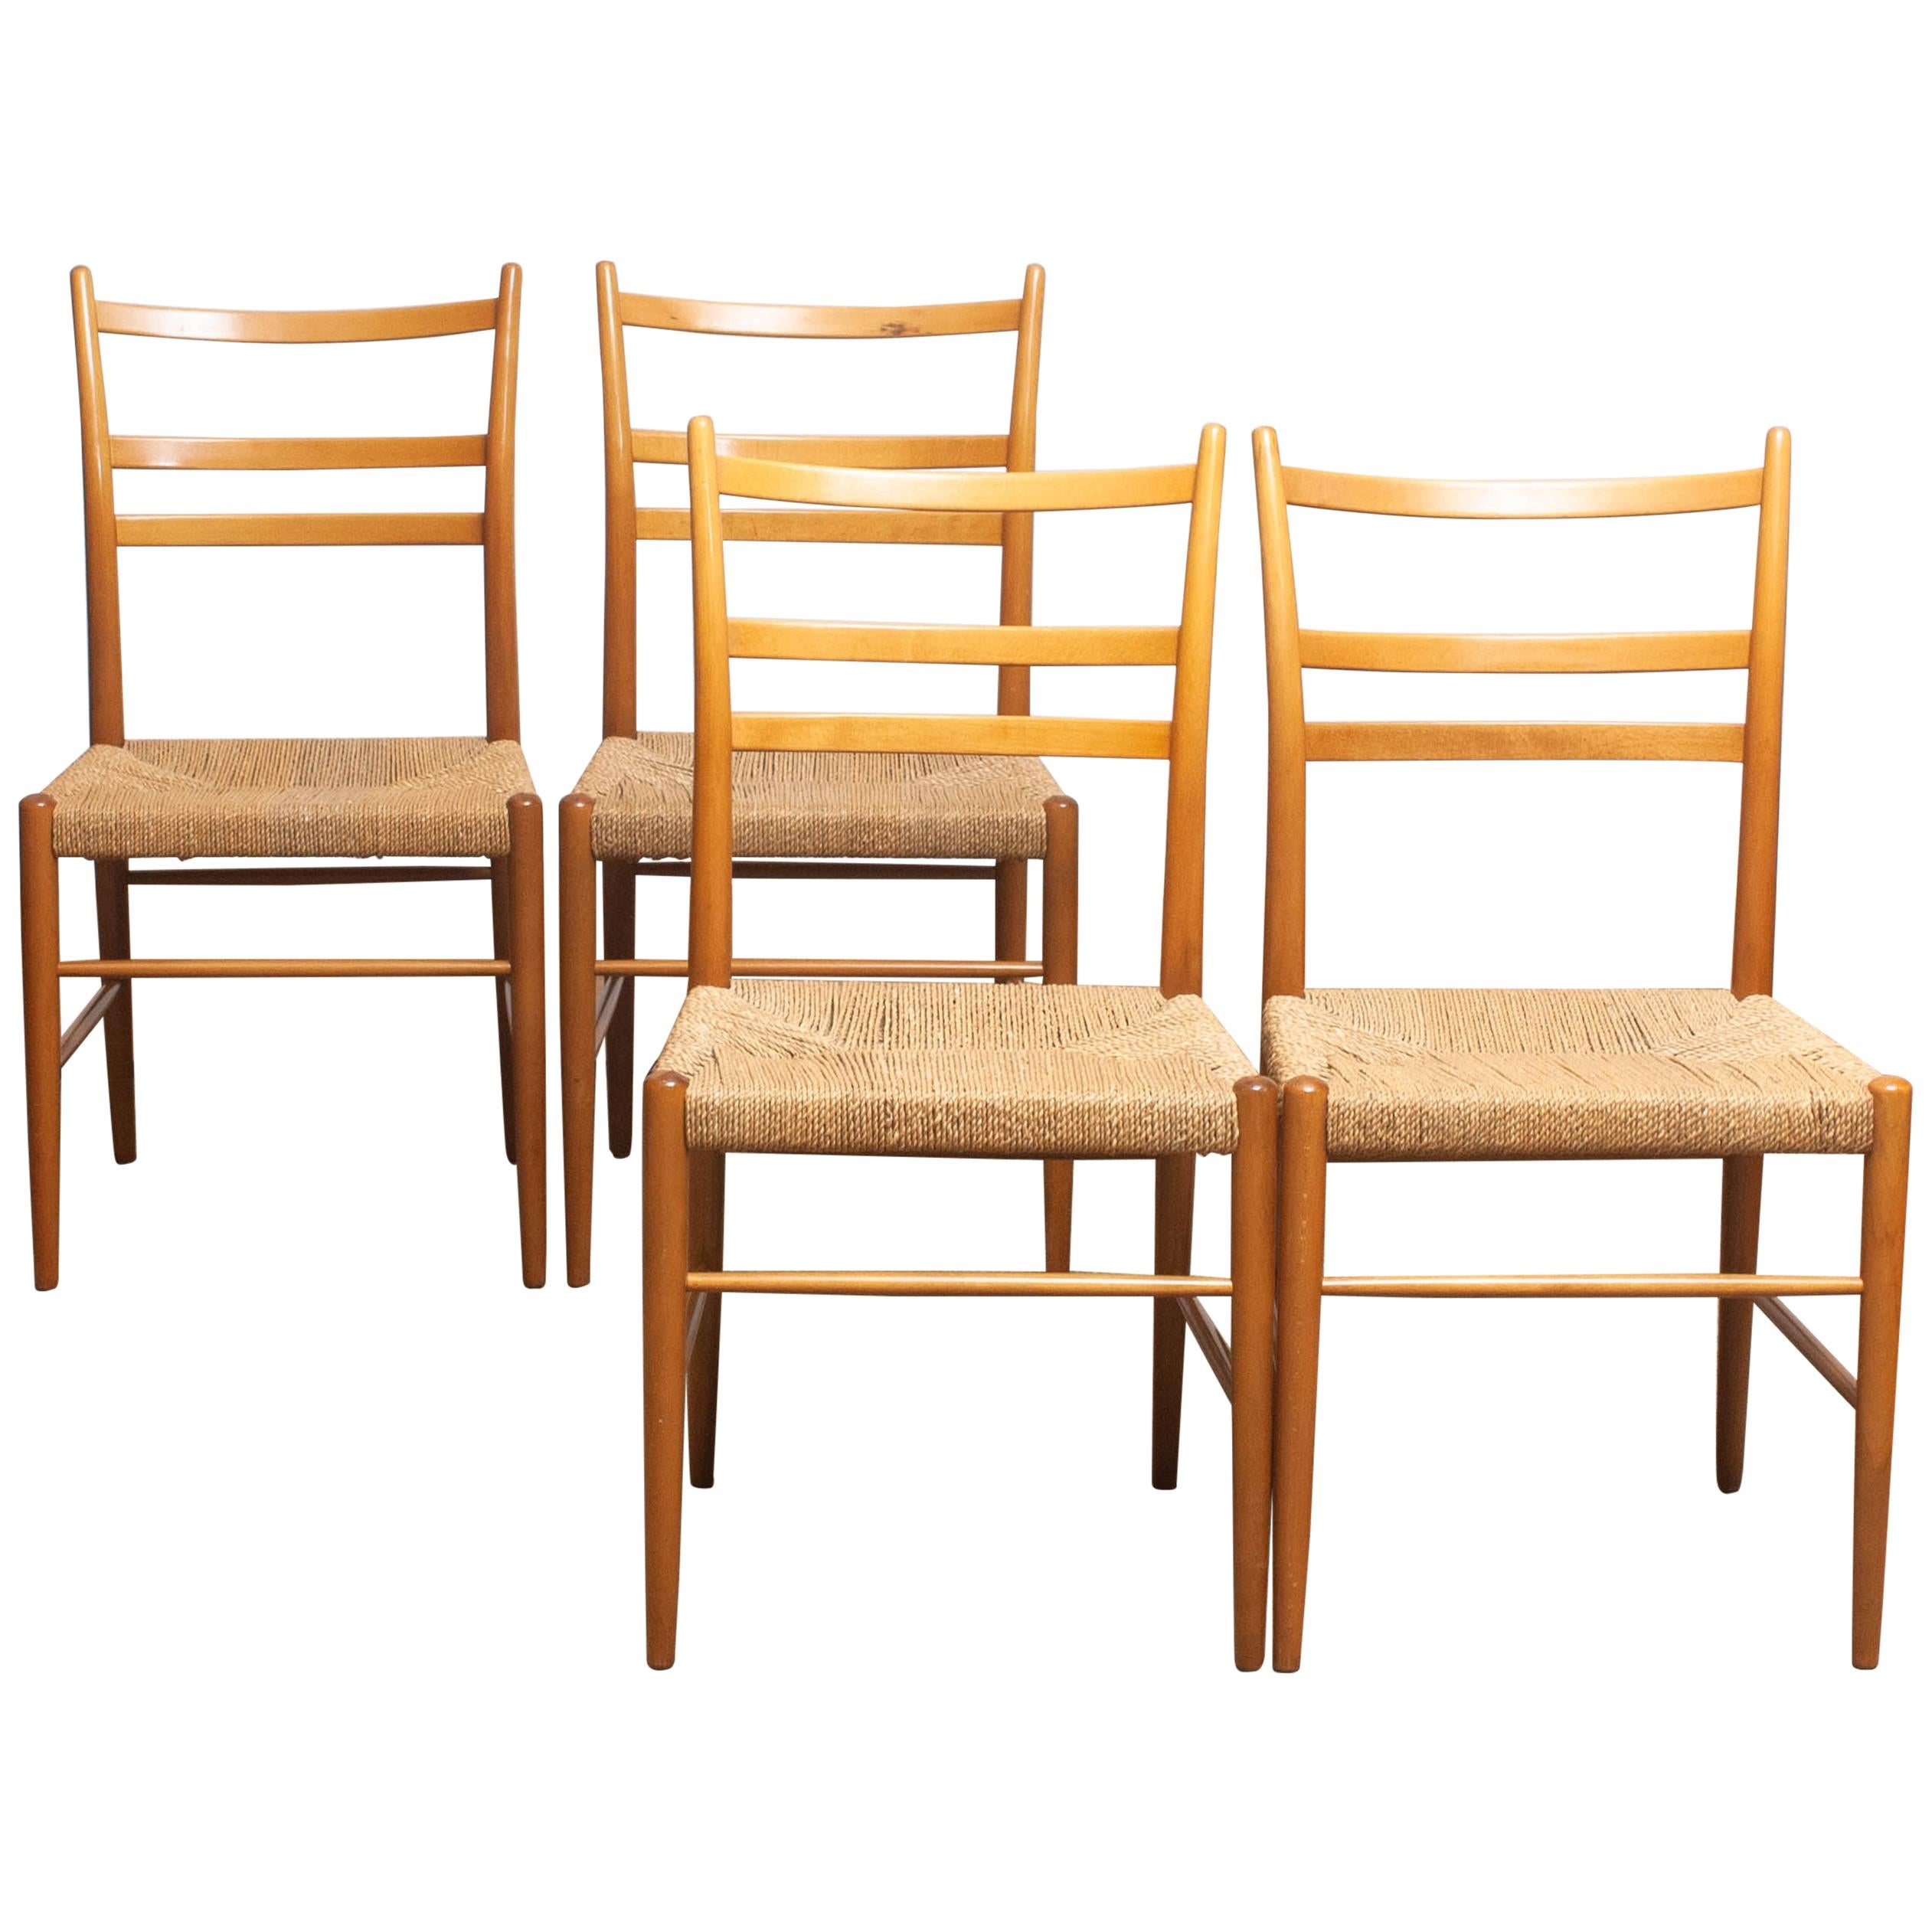 Extremely rare and beautiful set of four slim seagrass chairs in beech, model 'Gracell' designed by Yngve Ekström and manufactured by Gemla. All four chairs are in very good condition. The wicker seats are made of seagrass and are also in great